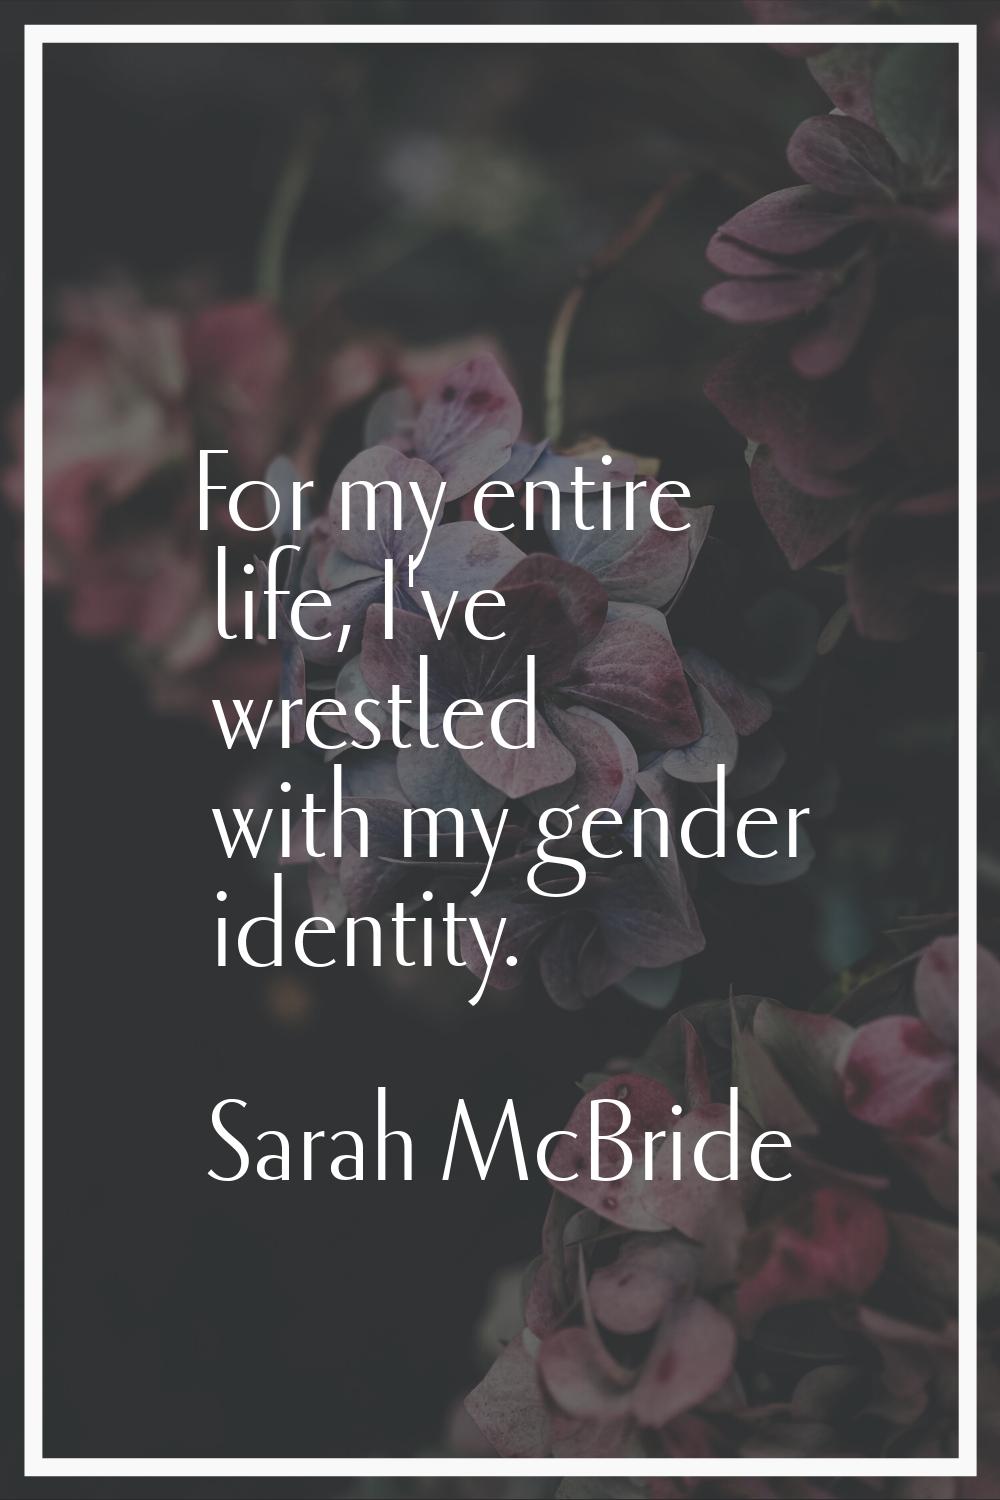 For my entire life, I've wrestled with my gender identity.